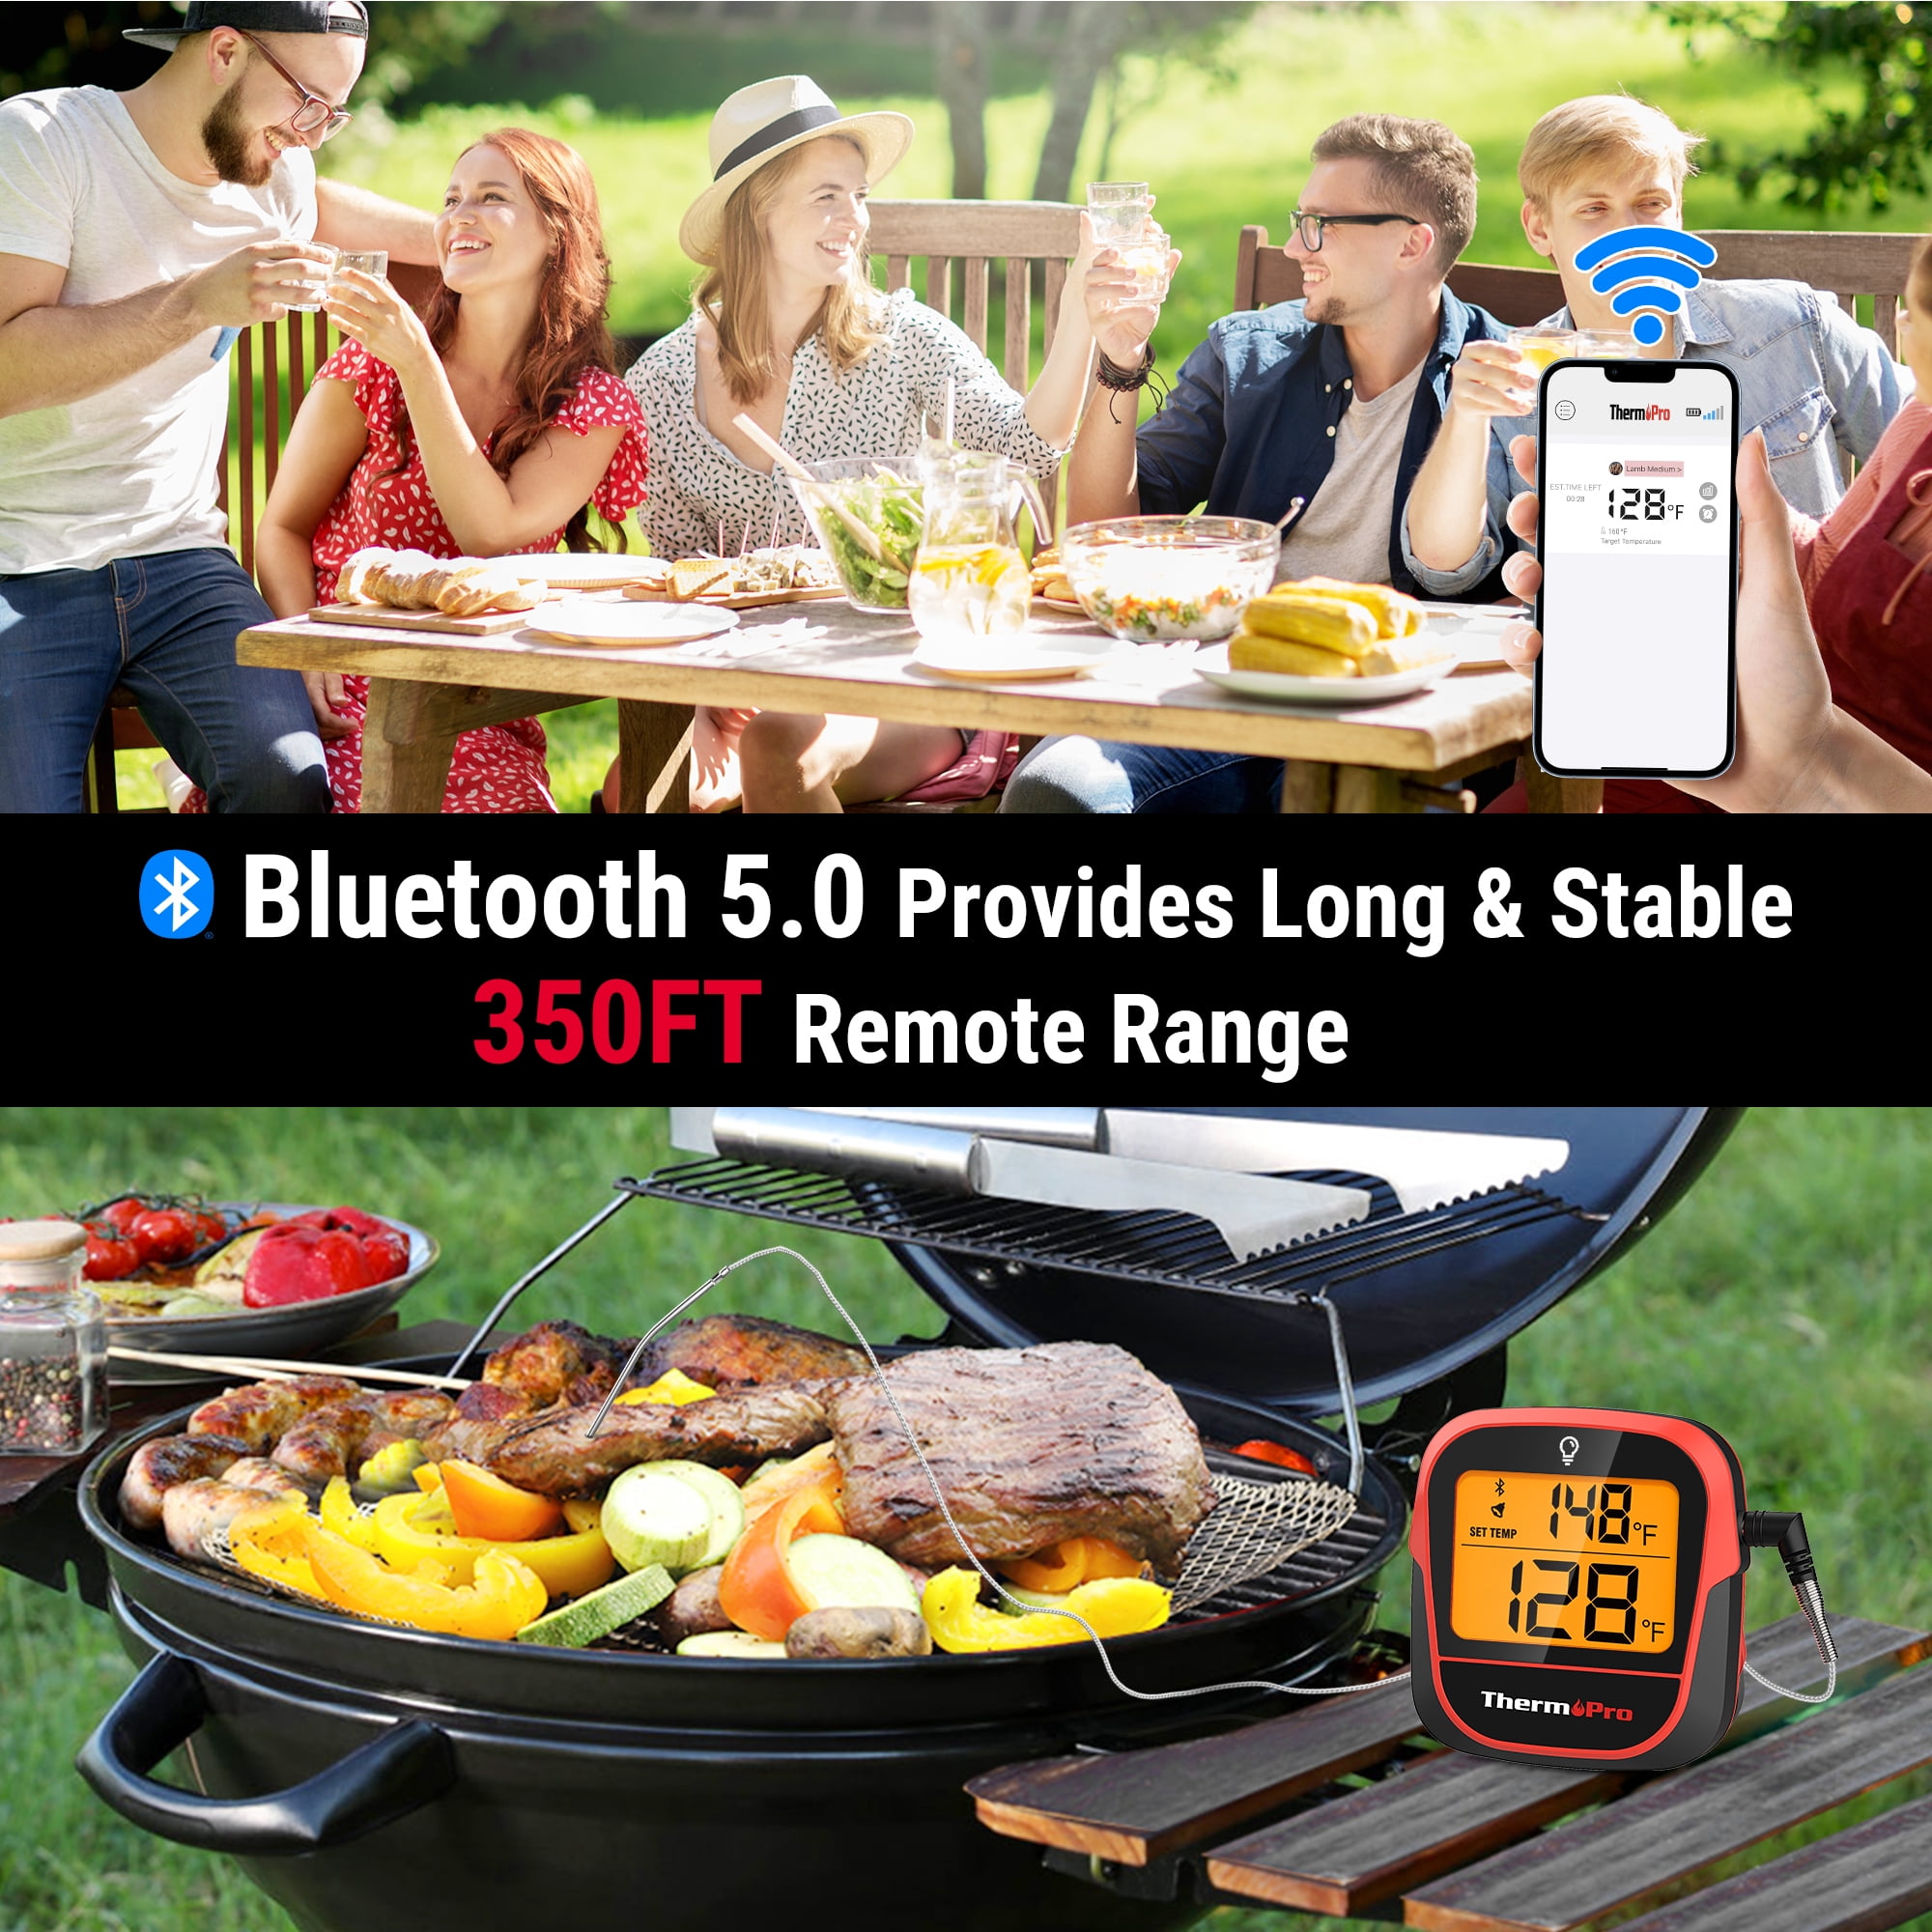 ThermoPro Smart Bluetooth Meat Thermometer with Dual Probes TP902W